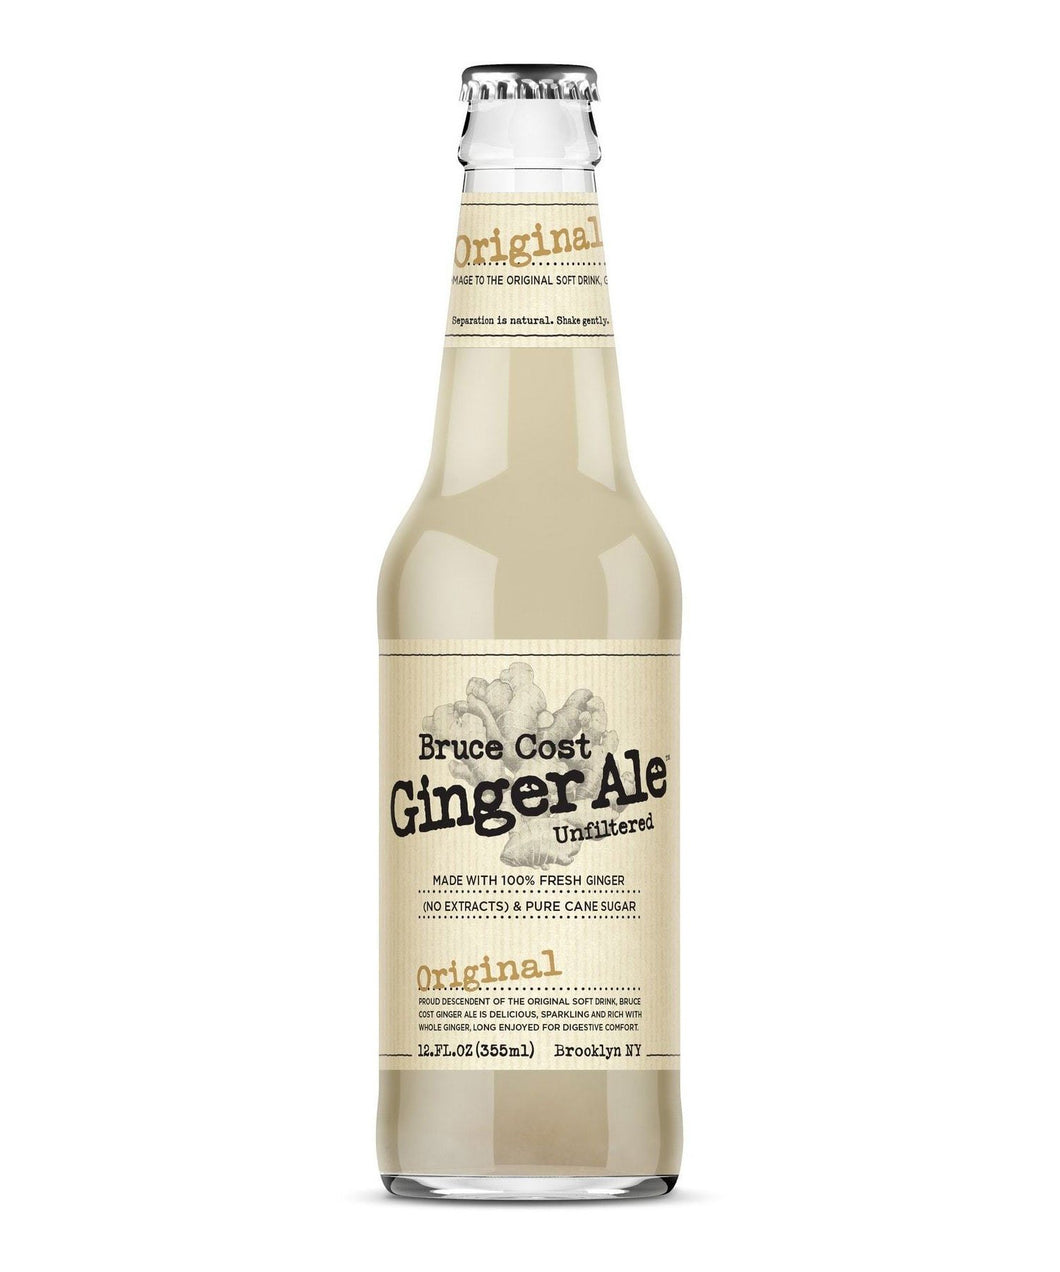 With only 4 ingredients, this is a fundamentally simple, delicious and spicy beverage. Made with fresh ginger and pure cane sugar and unfiltered. Rich with ginger particles, it provides iron, a little vitamin C and 100% deliciousness  Ingredients: Carbonated Water, Pure Cane Sugar, 100% Fresh Ginger, Citric Acid     12 oz. bottle